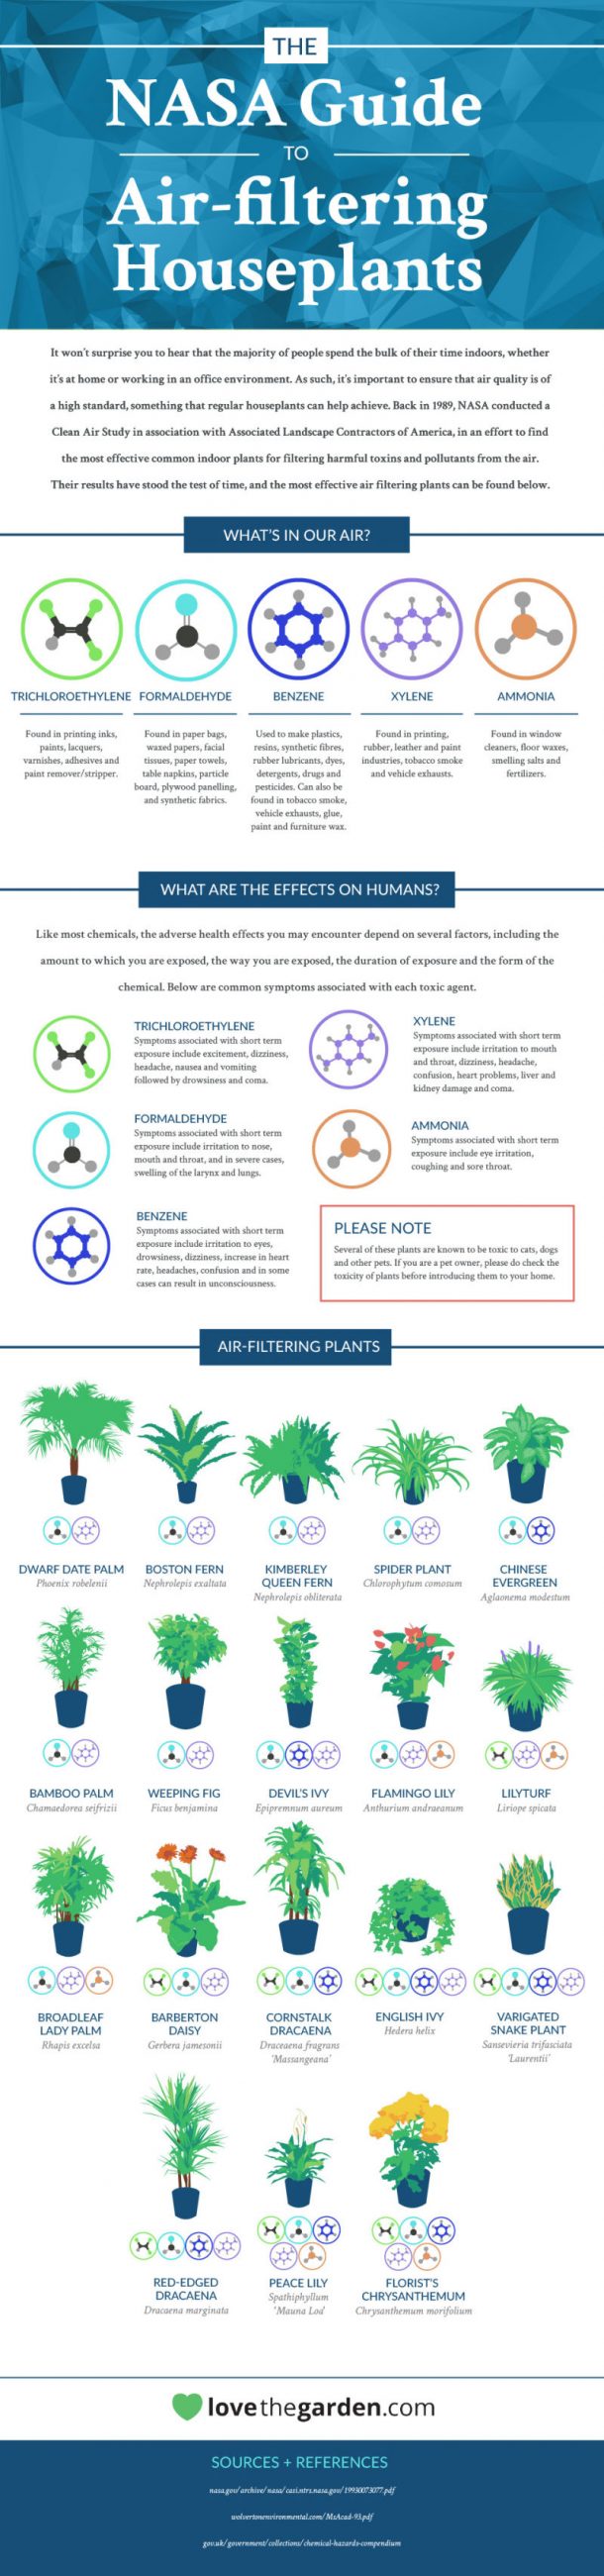 18 Plants That Are Best At Filtering Air In Your Home According To NASA 2